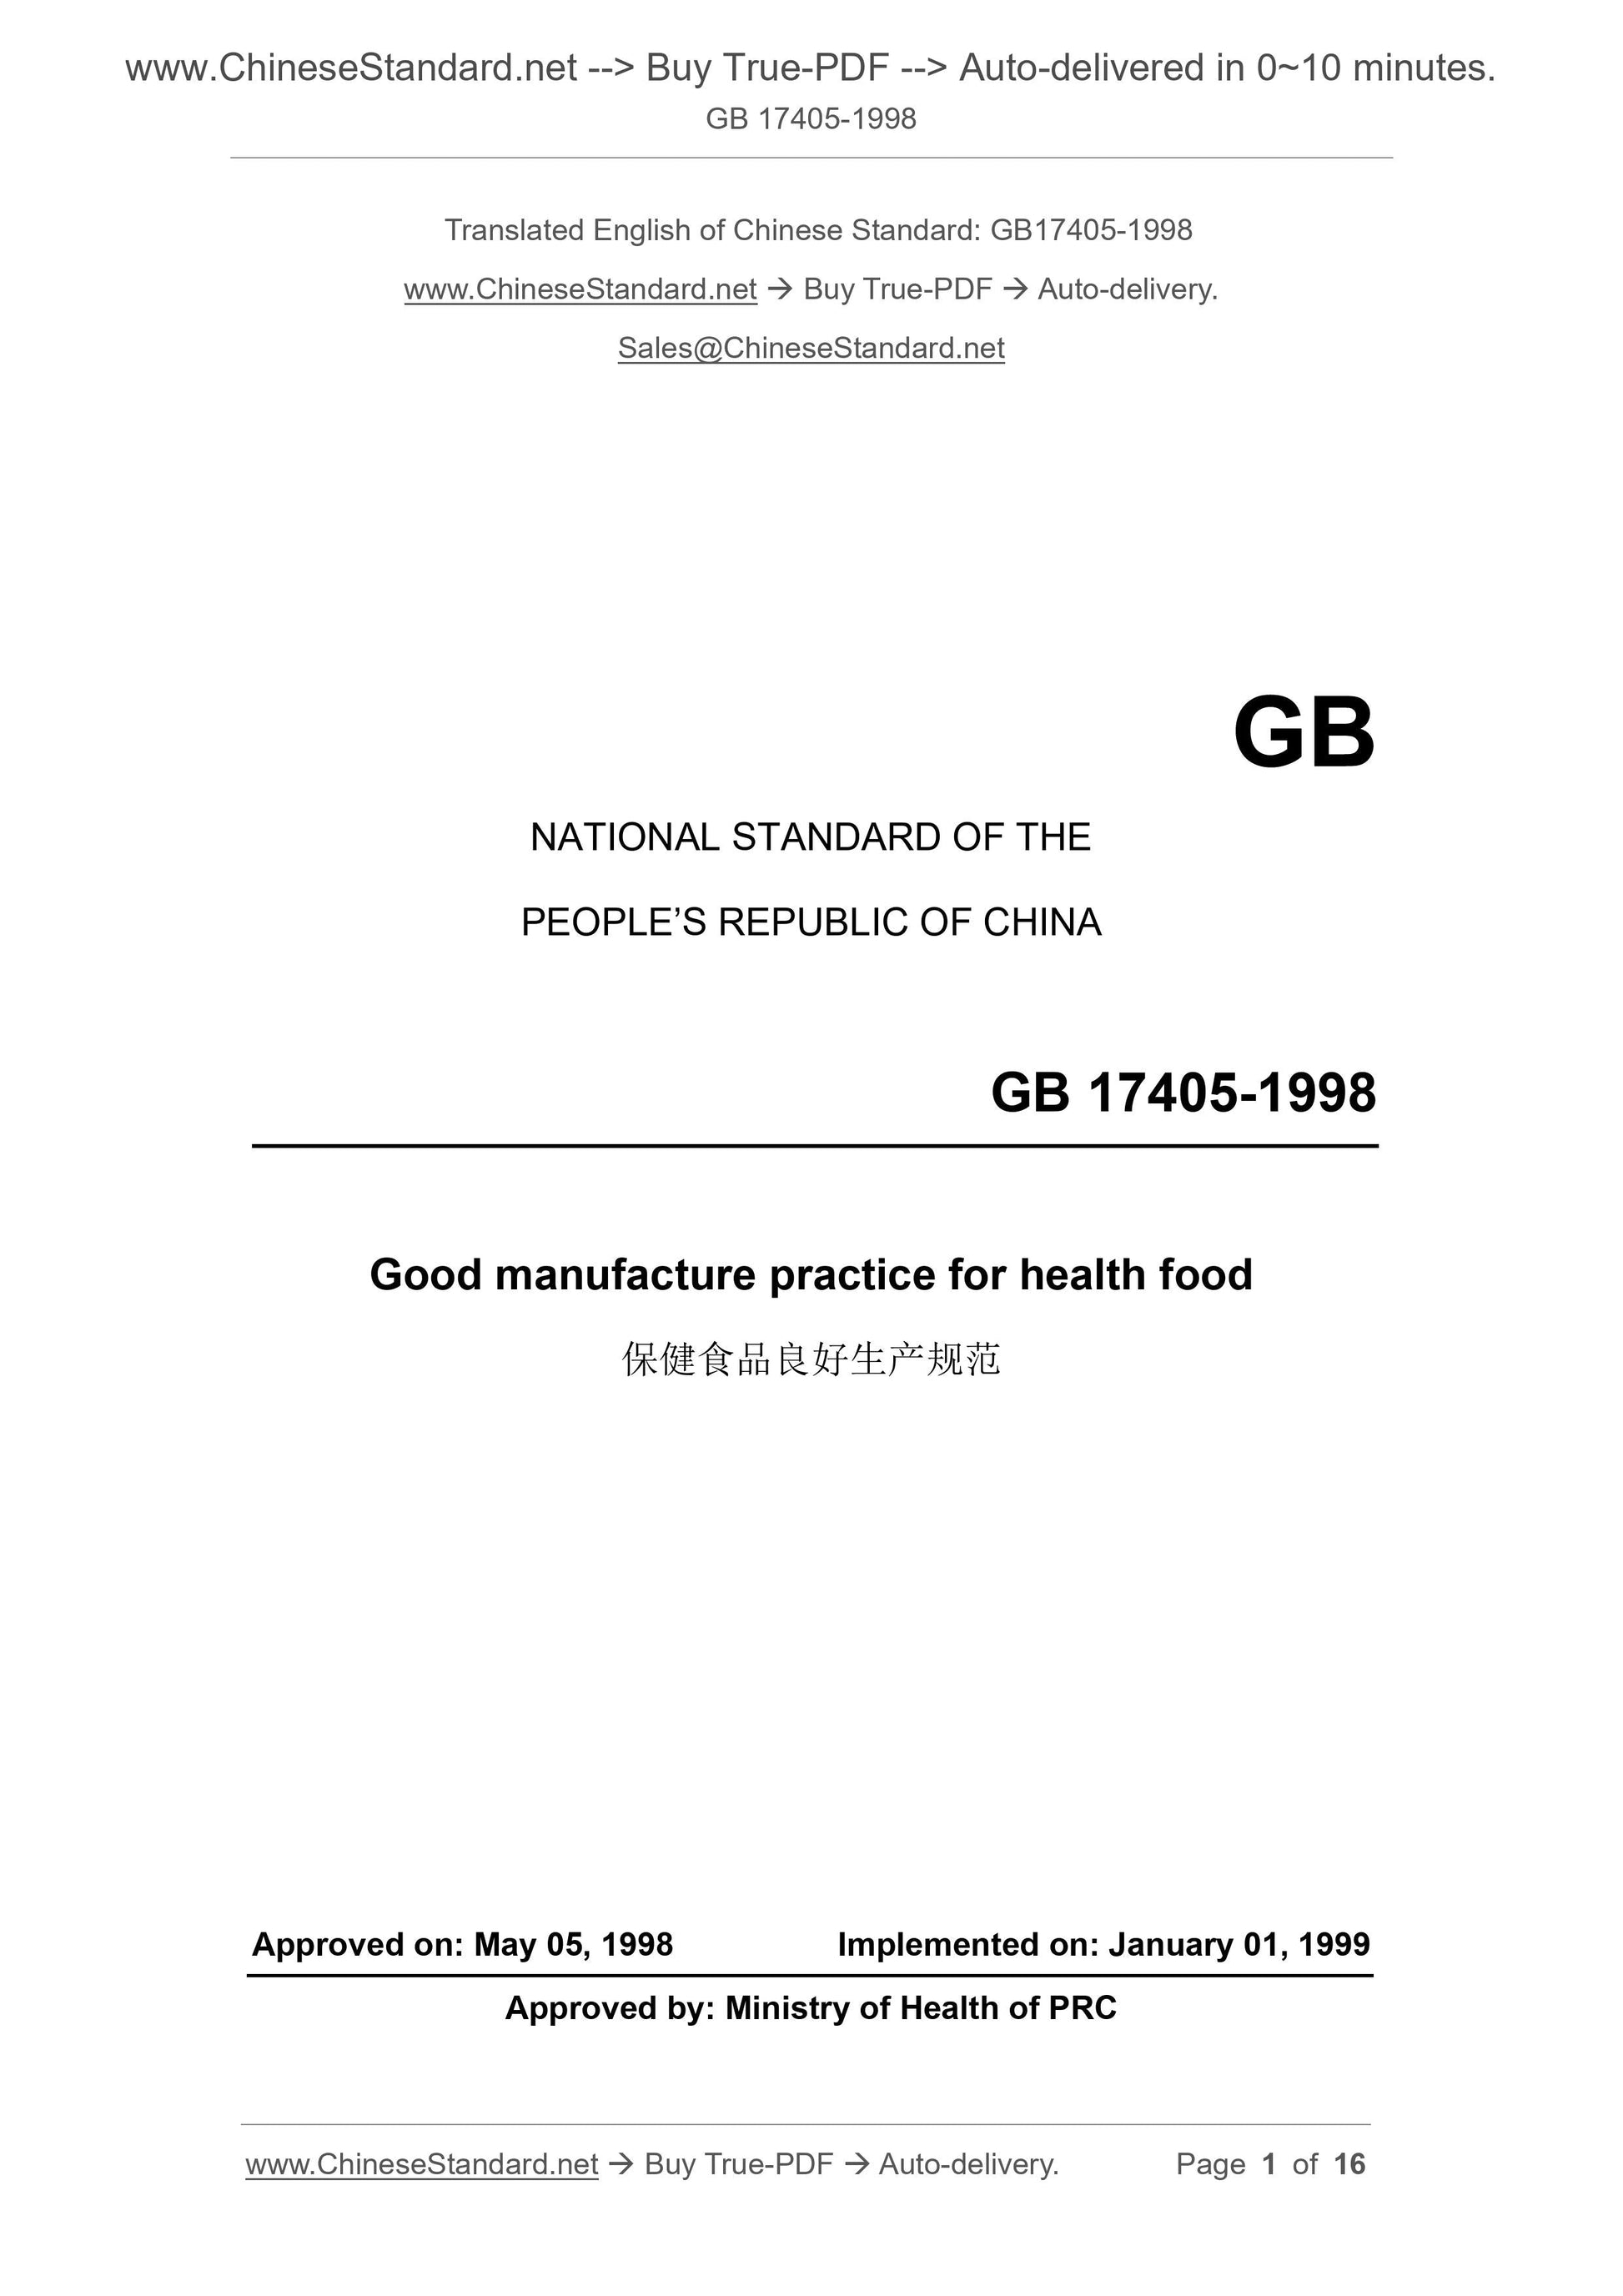 GB 17405-1998 Page 1